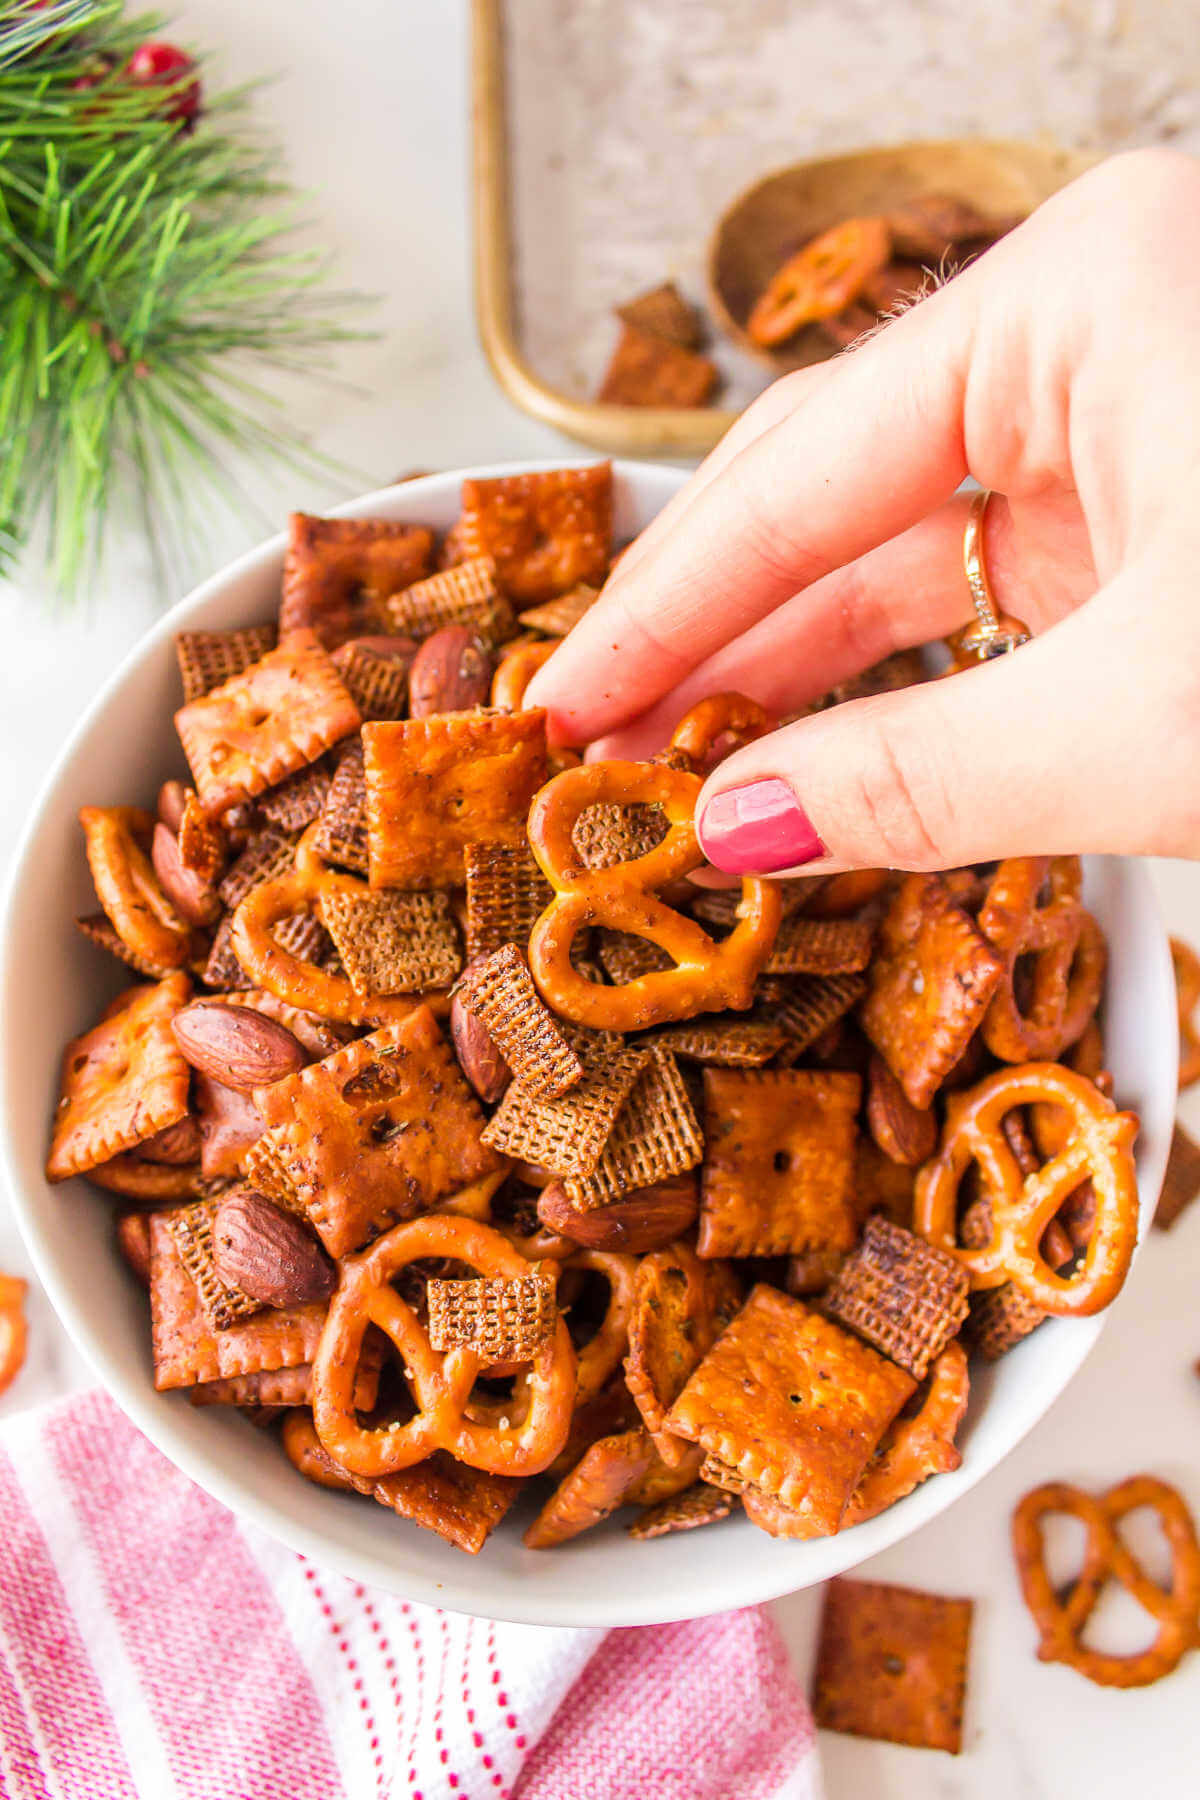 a hand grabbing a bite of Chex mix from a bowl.